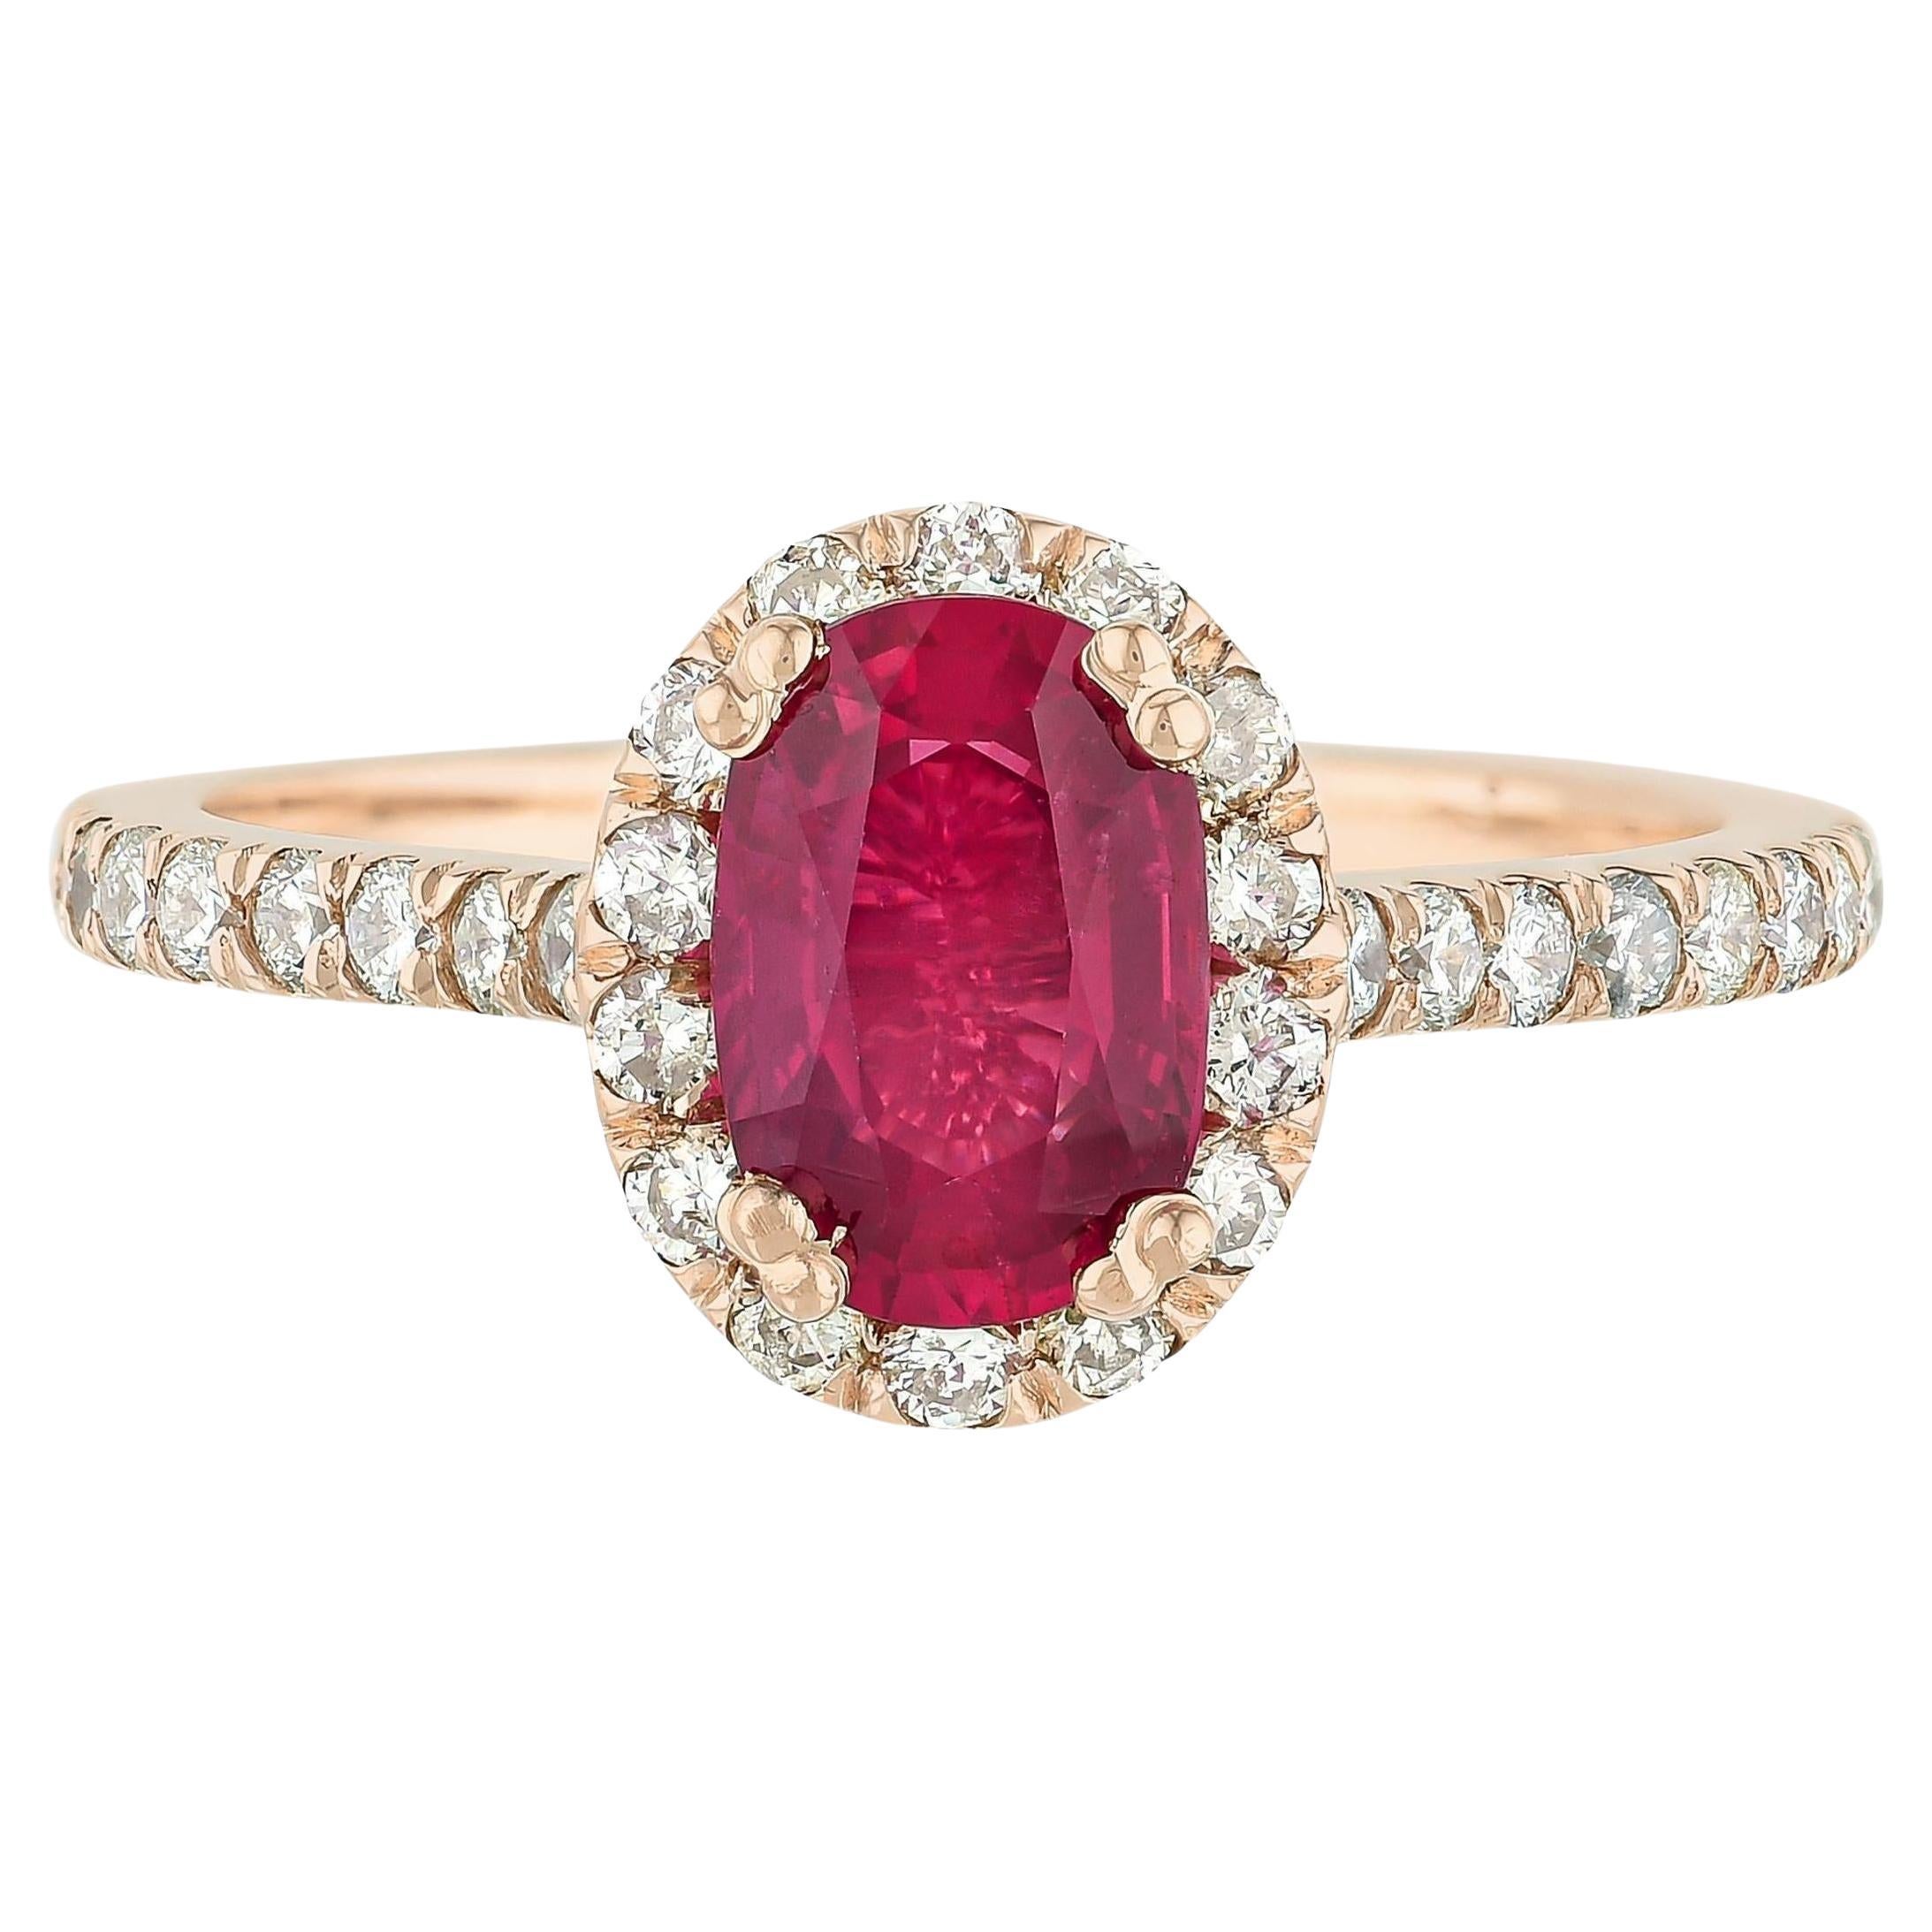 GIA Certified 1.10 Carat Natural Unheated Ruby Ring Set with Diamonds